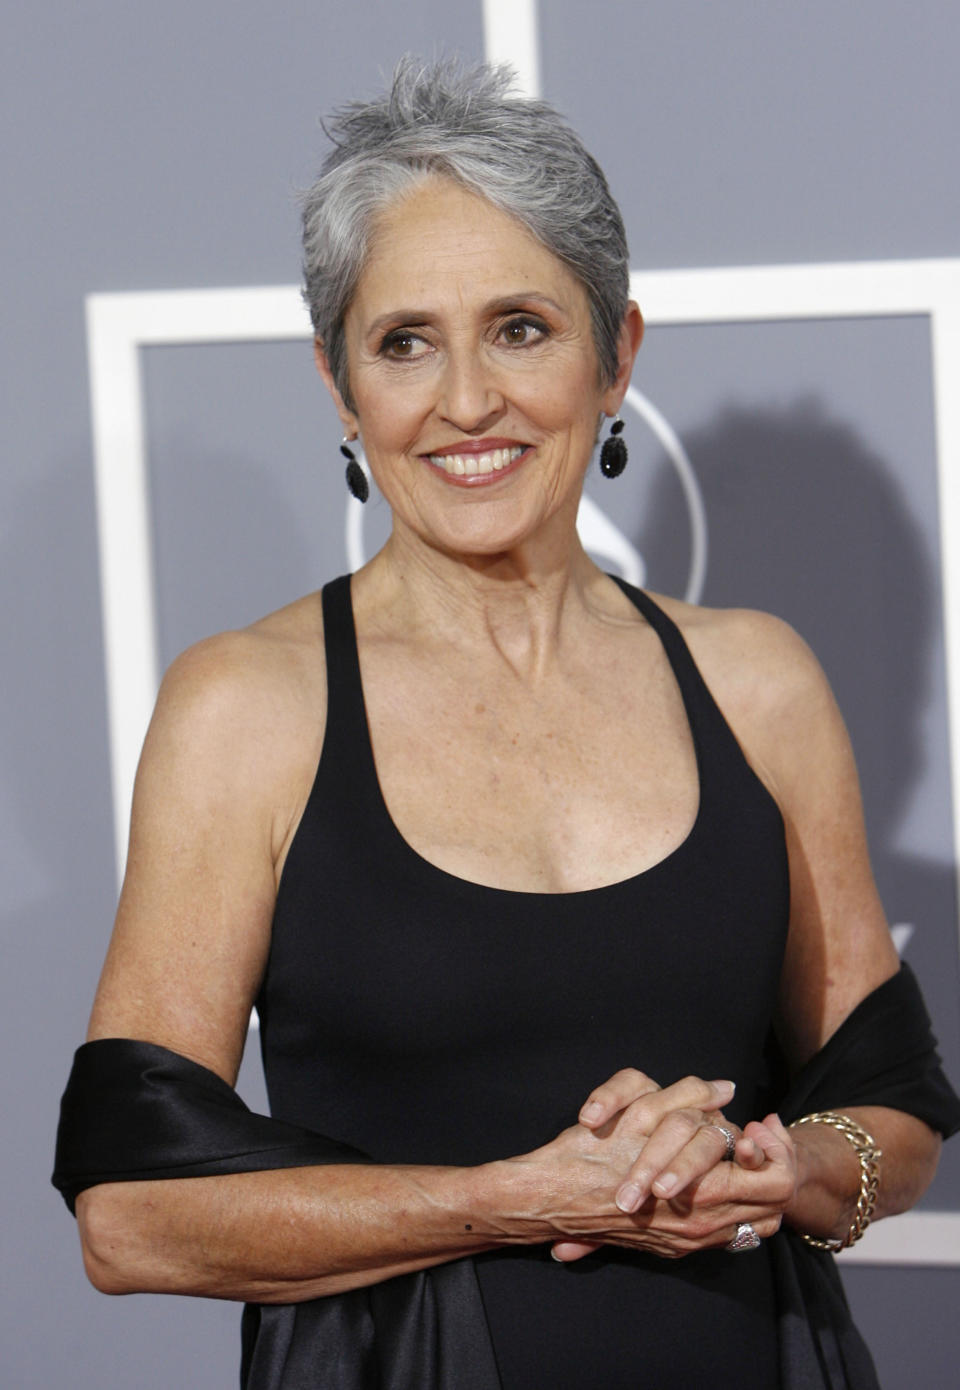 FILE - Joan Baez arrives for the 49th Annual Grammy Awards in Los Angeles on Feb. 11, 2007. Baez is the subject of a documentary titled, "Joan Baez: I Am a Noise." (AP Photo/Matt Sayles, File)